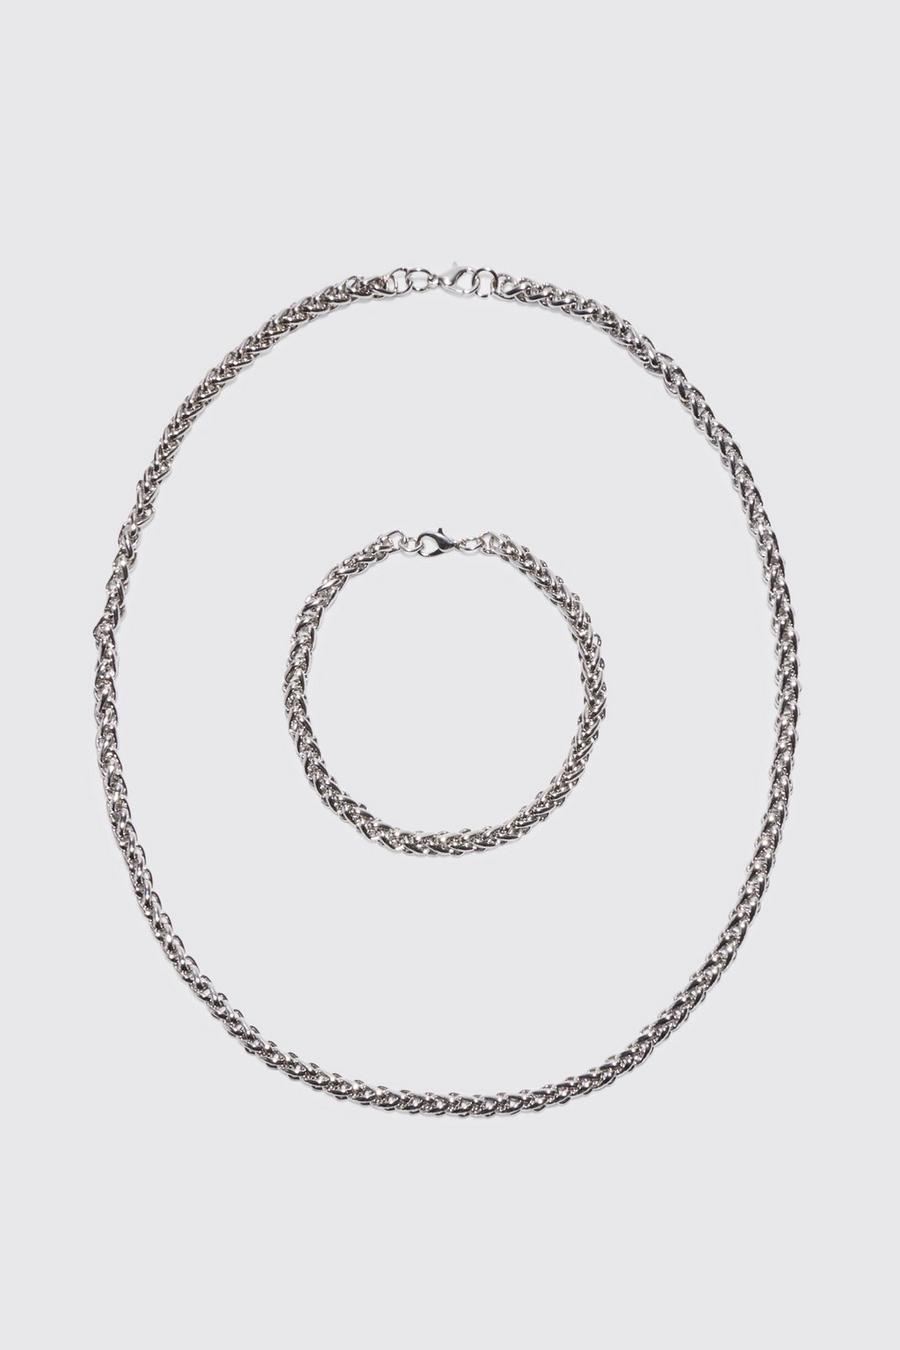 Silver argent Rope Chain Necklace And Bracelet Set